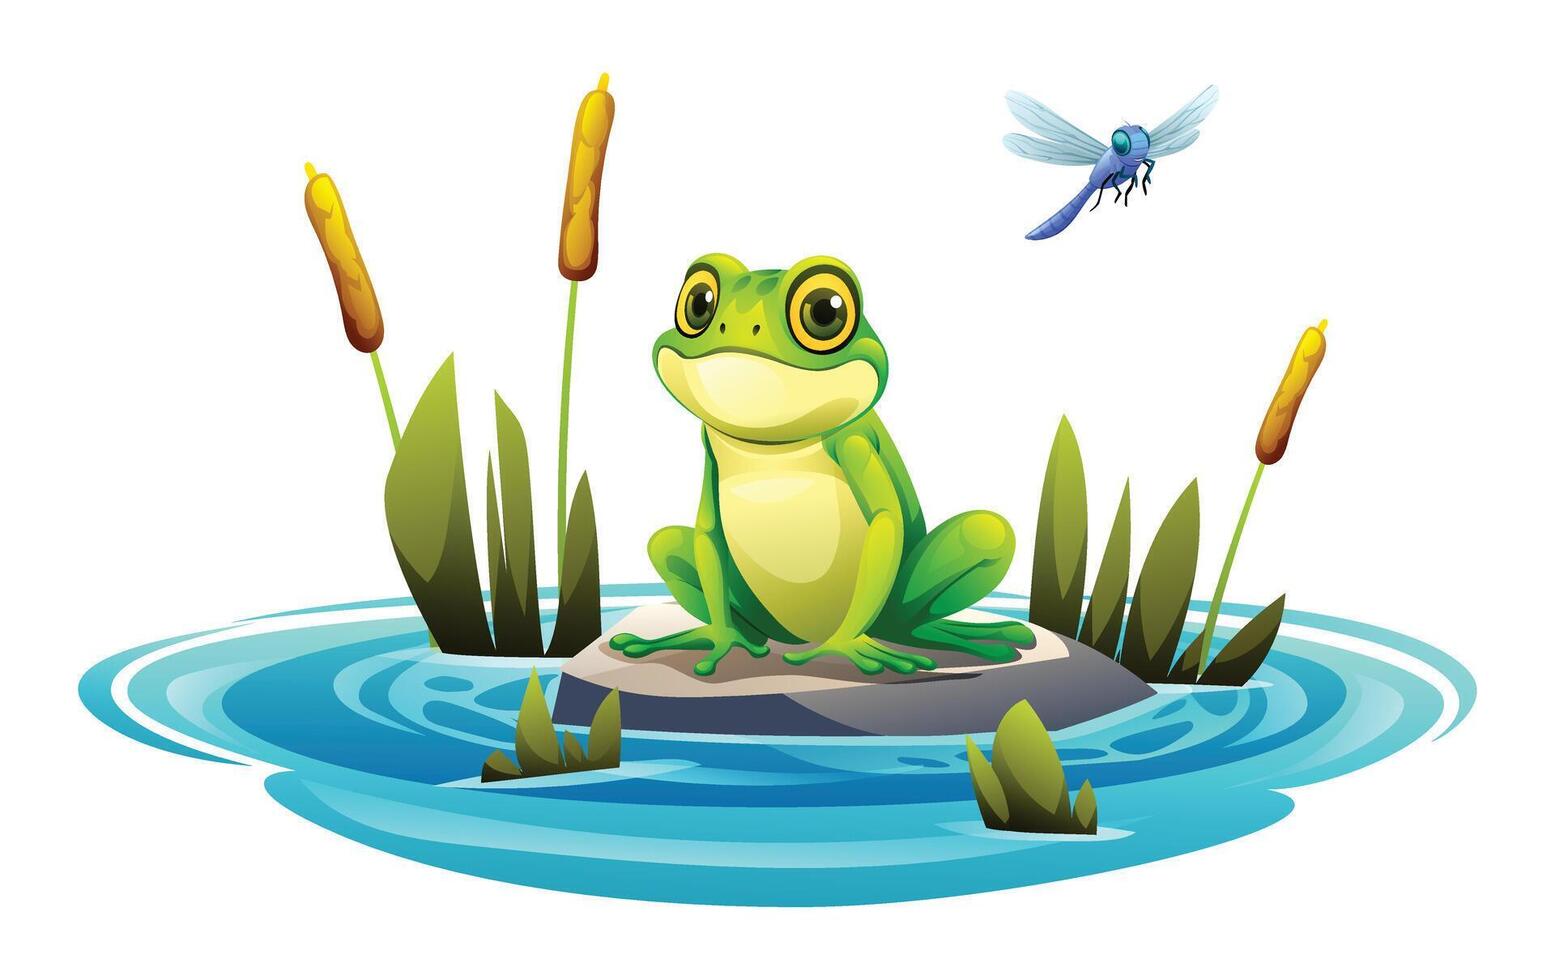 Frog sitting on a rock in pond with dragonfly. Vector cartoon illustration